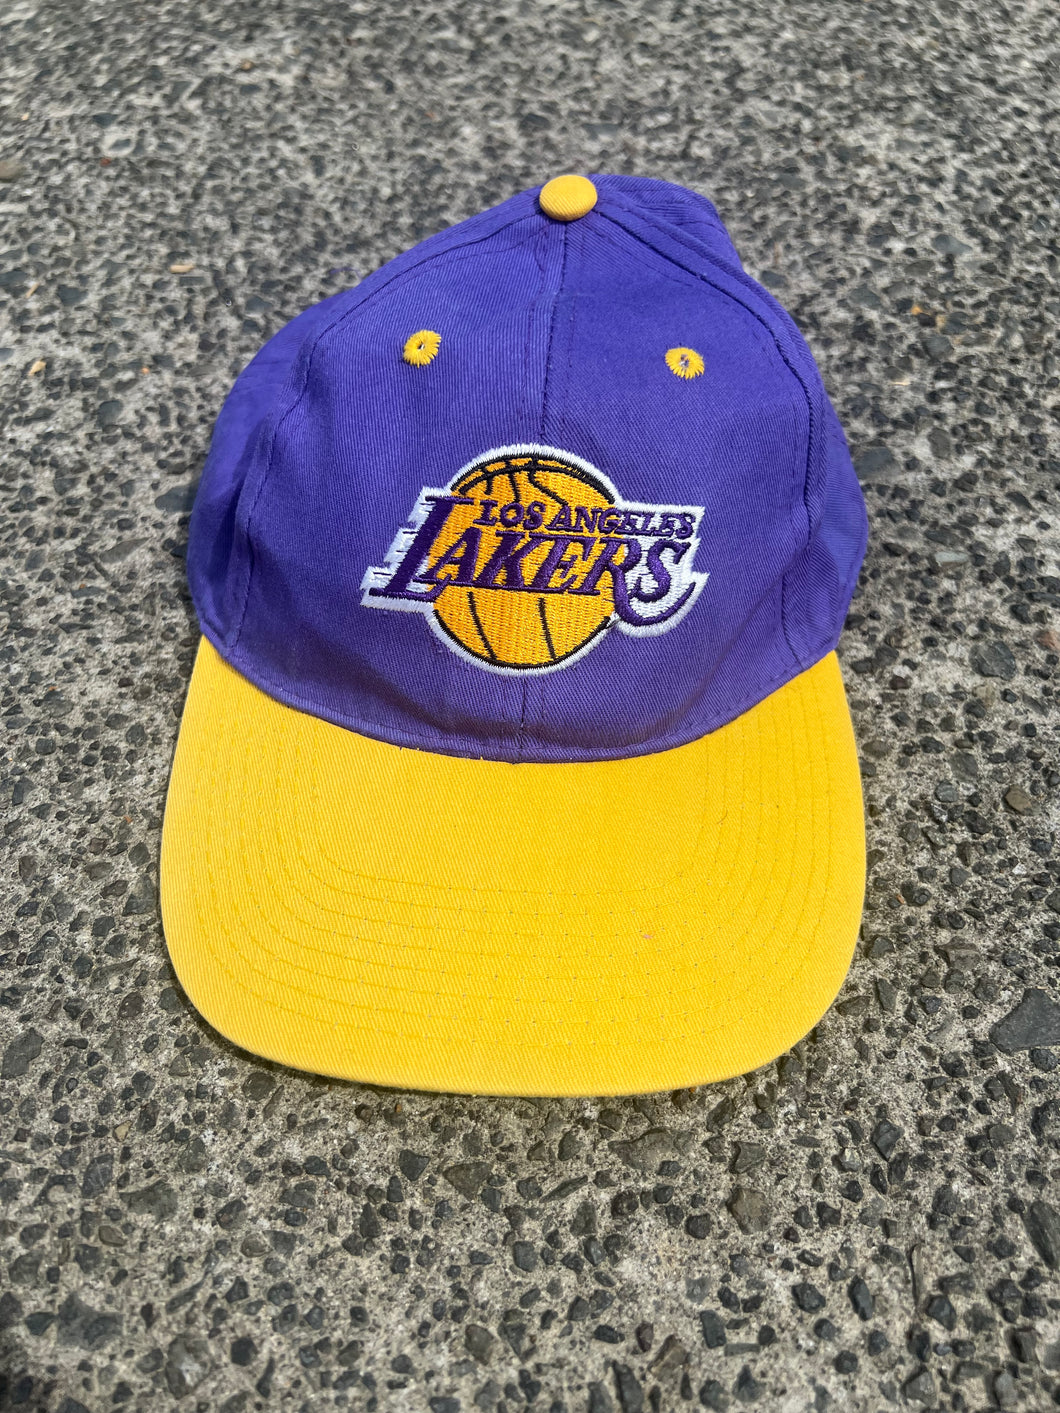 NBA - LOS ANGELES LAKERS VINTAGE HAT - ONE SIZE FITS ALL - OSFA